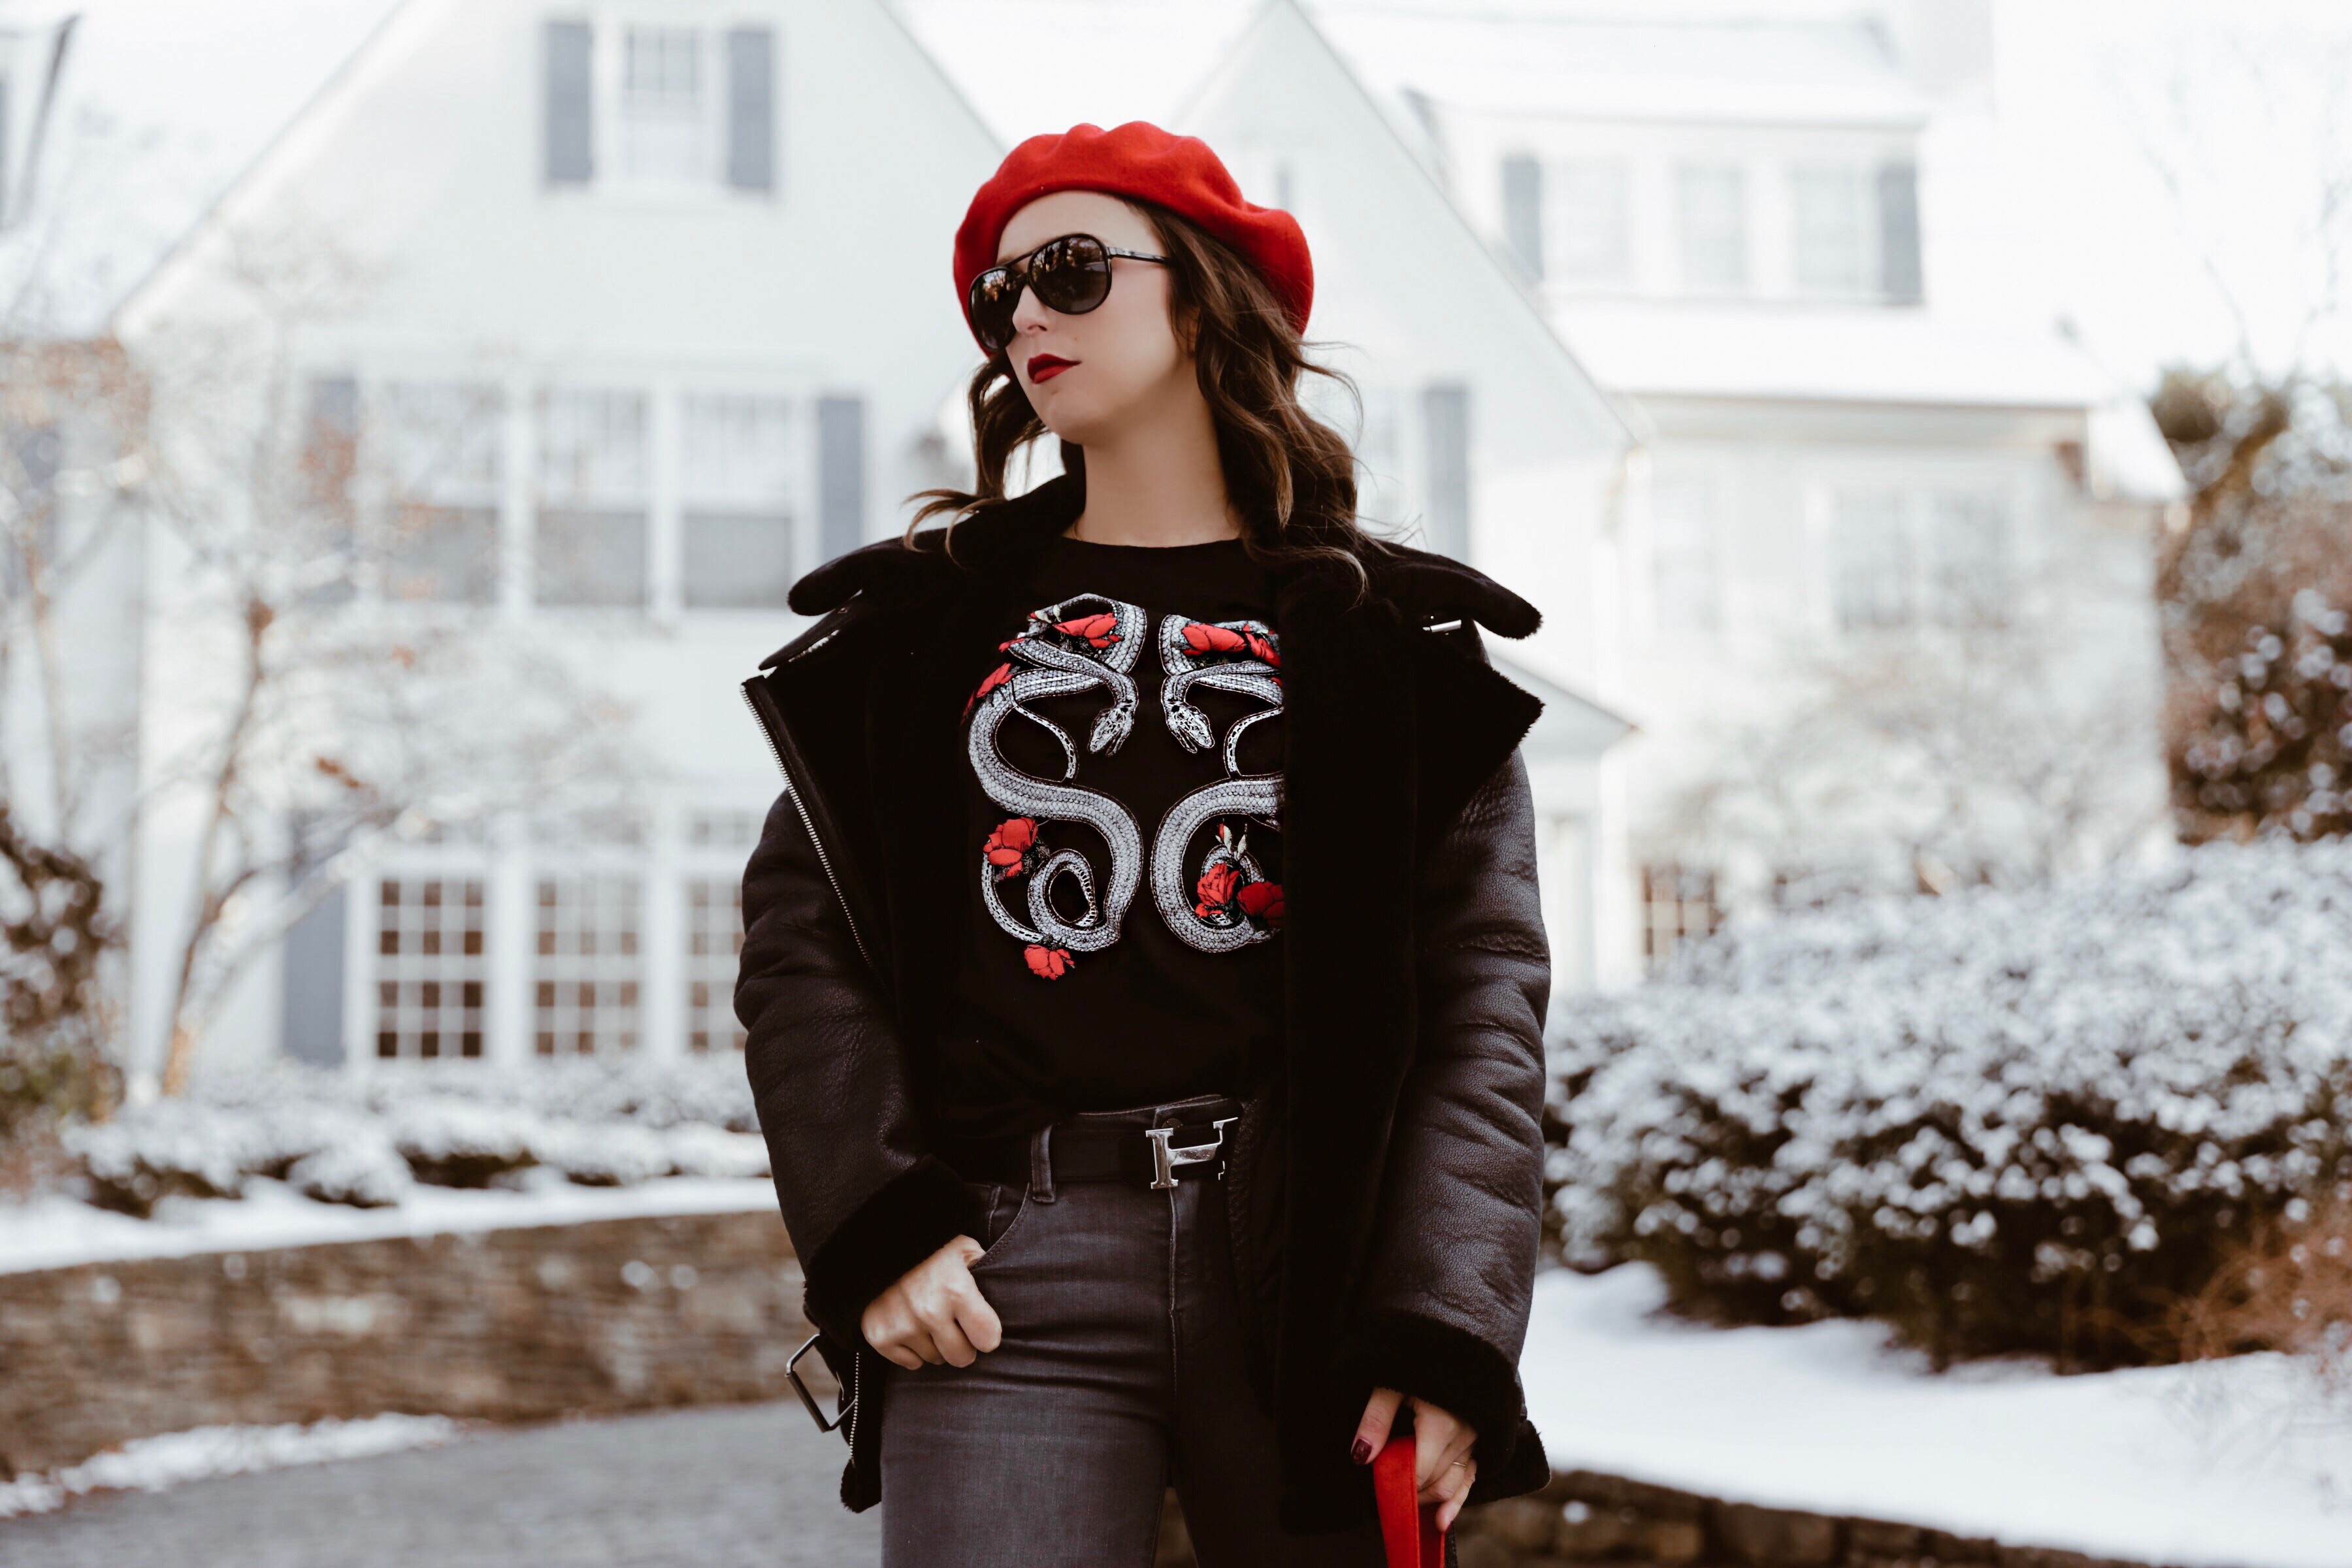 Staying Motivated-beret-pop of red-t shirt-street style-fashion-outfit-edgy style-new york-nyc-suburbs-casual outfit-ootd